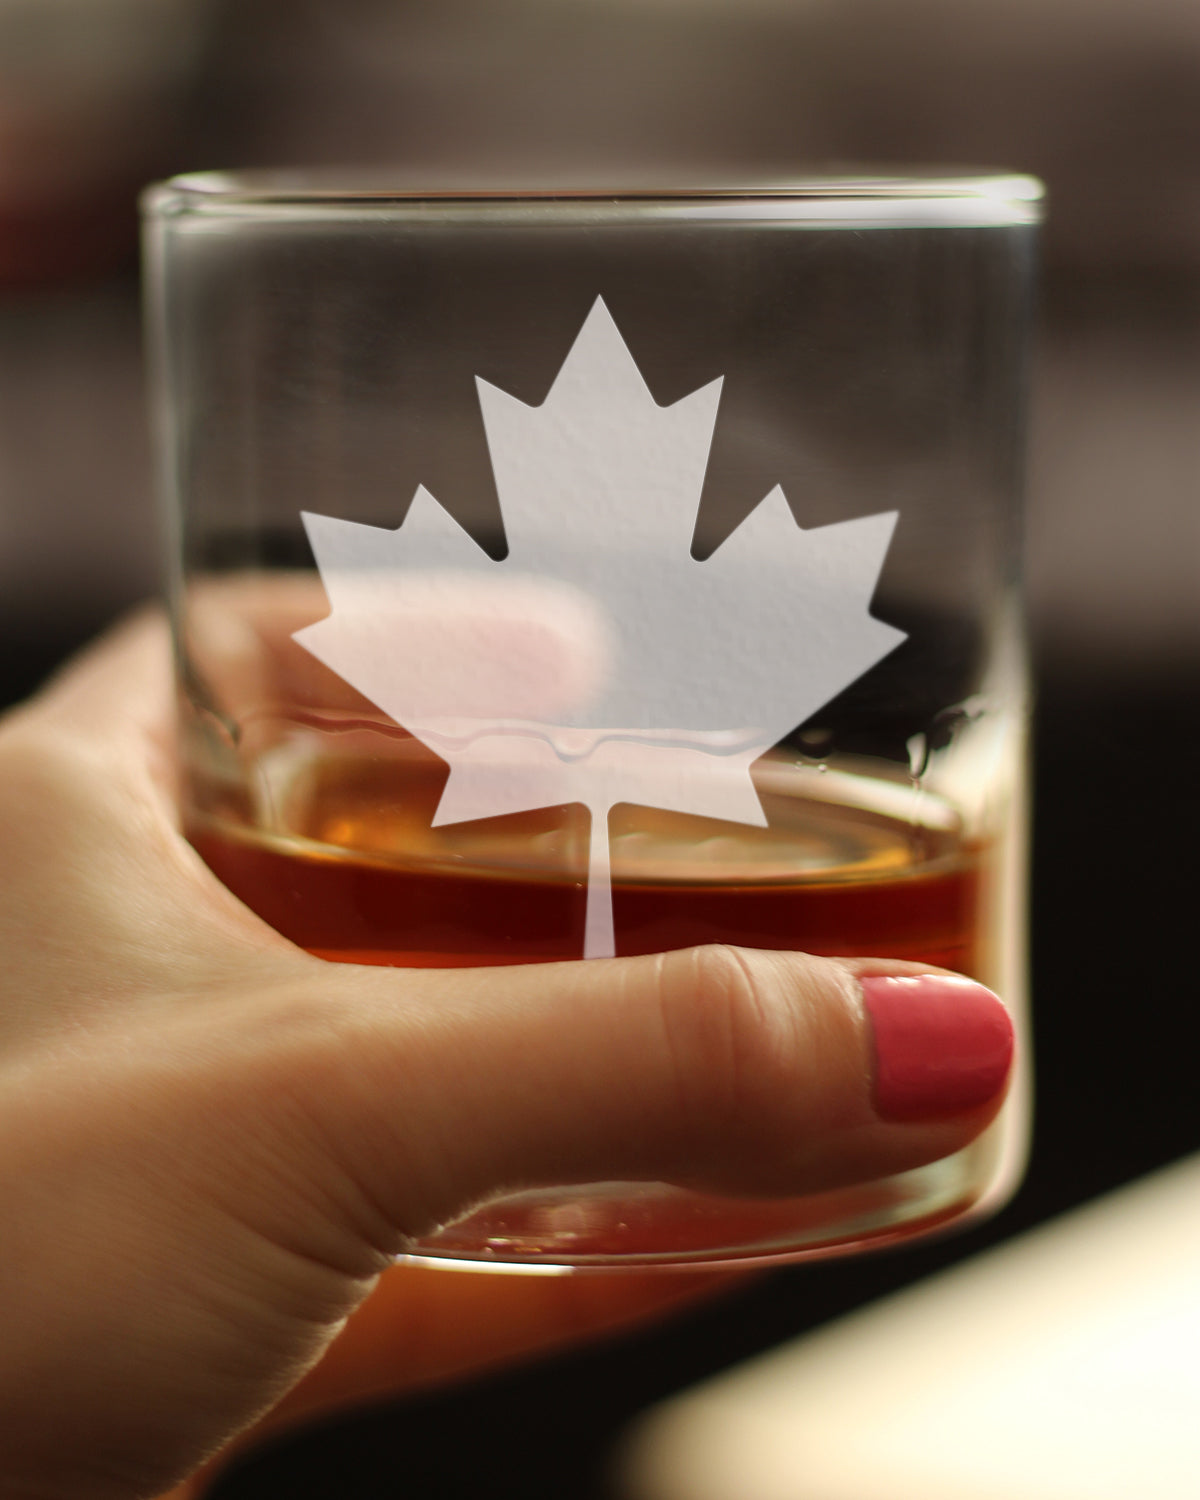 Canada Maple Leaf Rocks Glass - Canadian Flag Gifts and Decor for Women and Men - 10.25 Oz Glasses